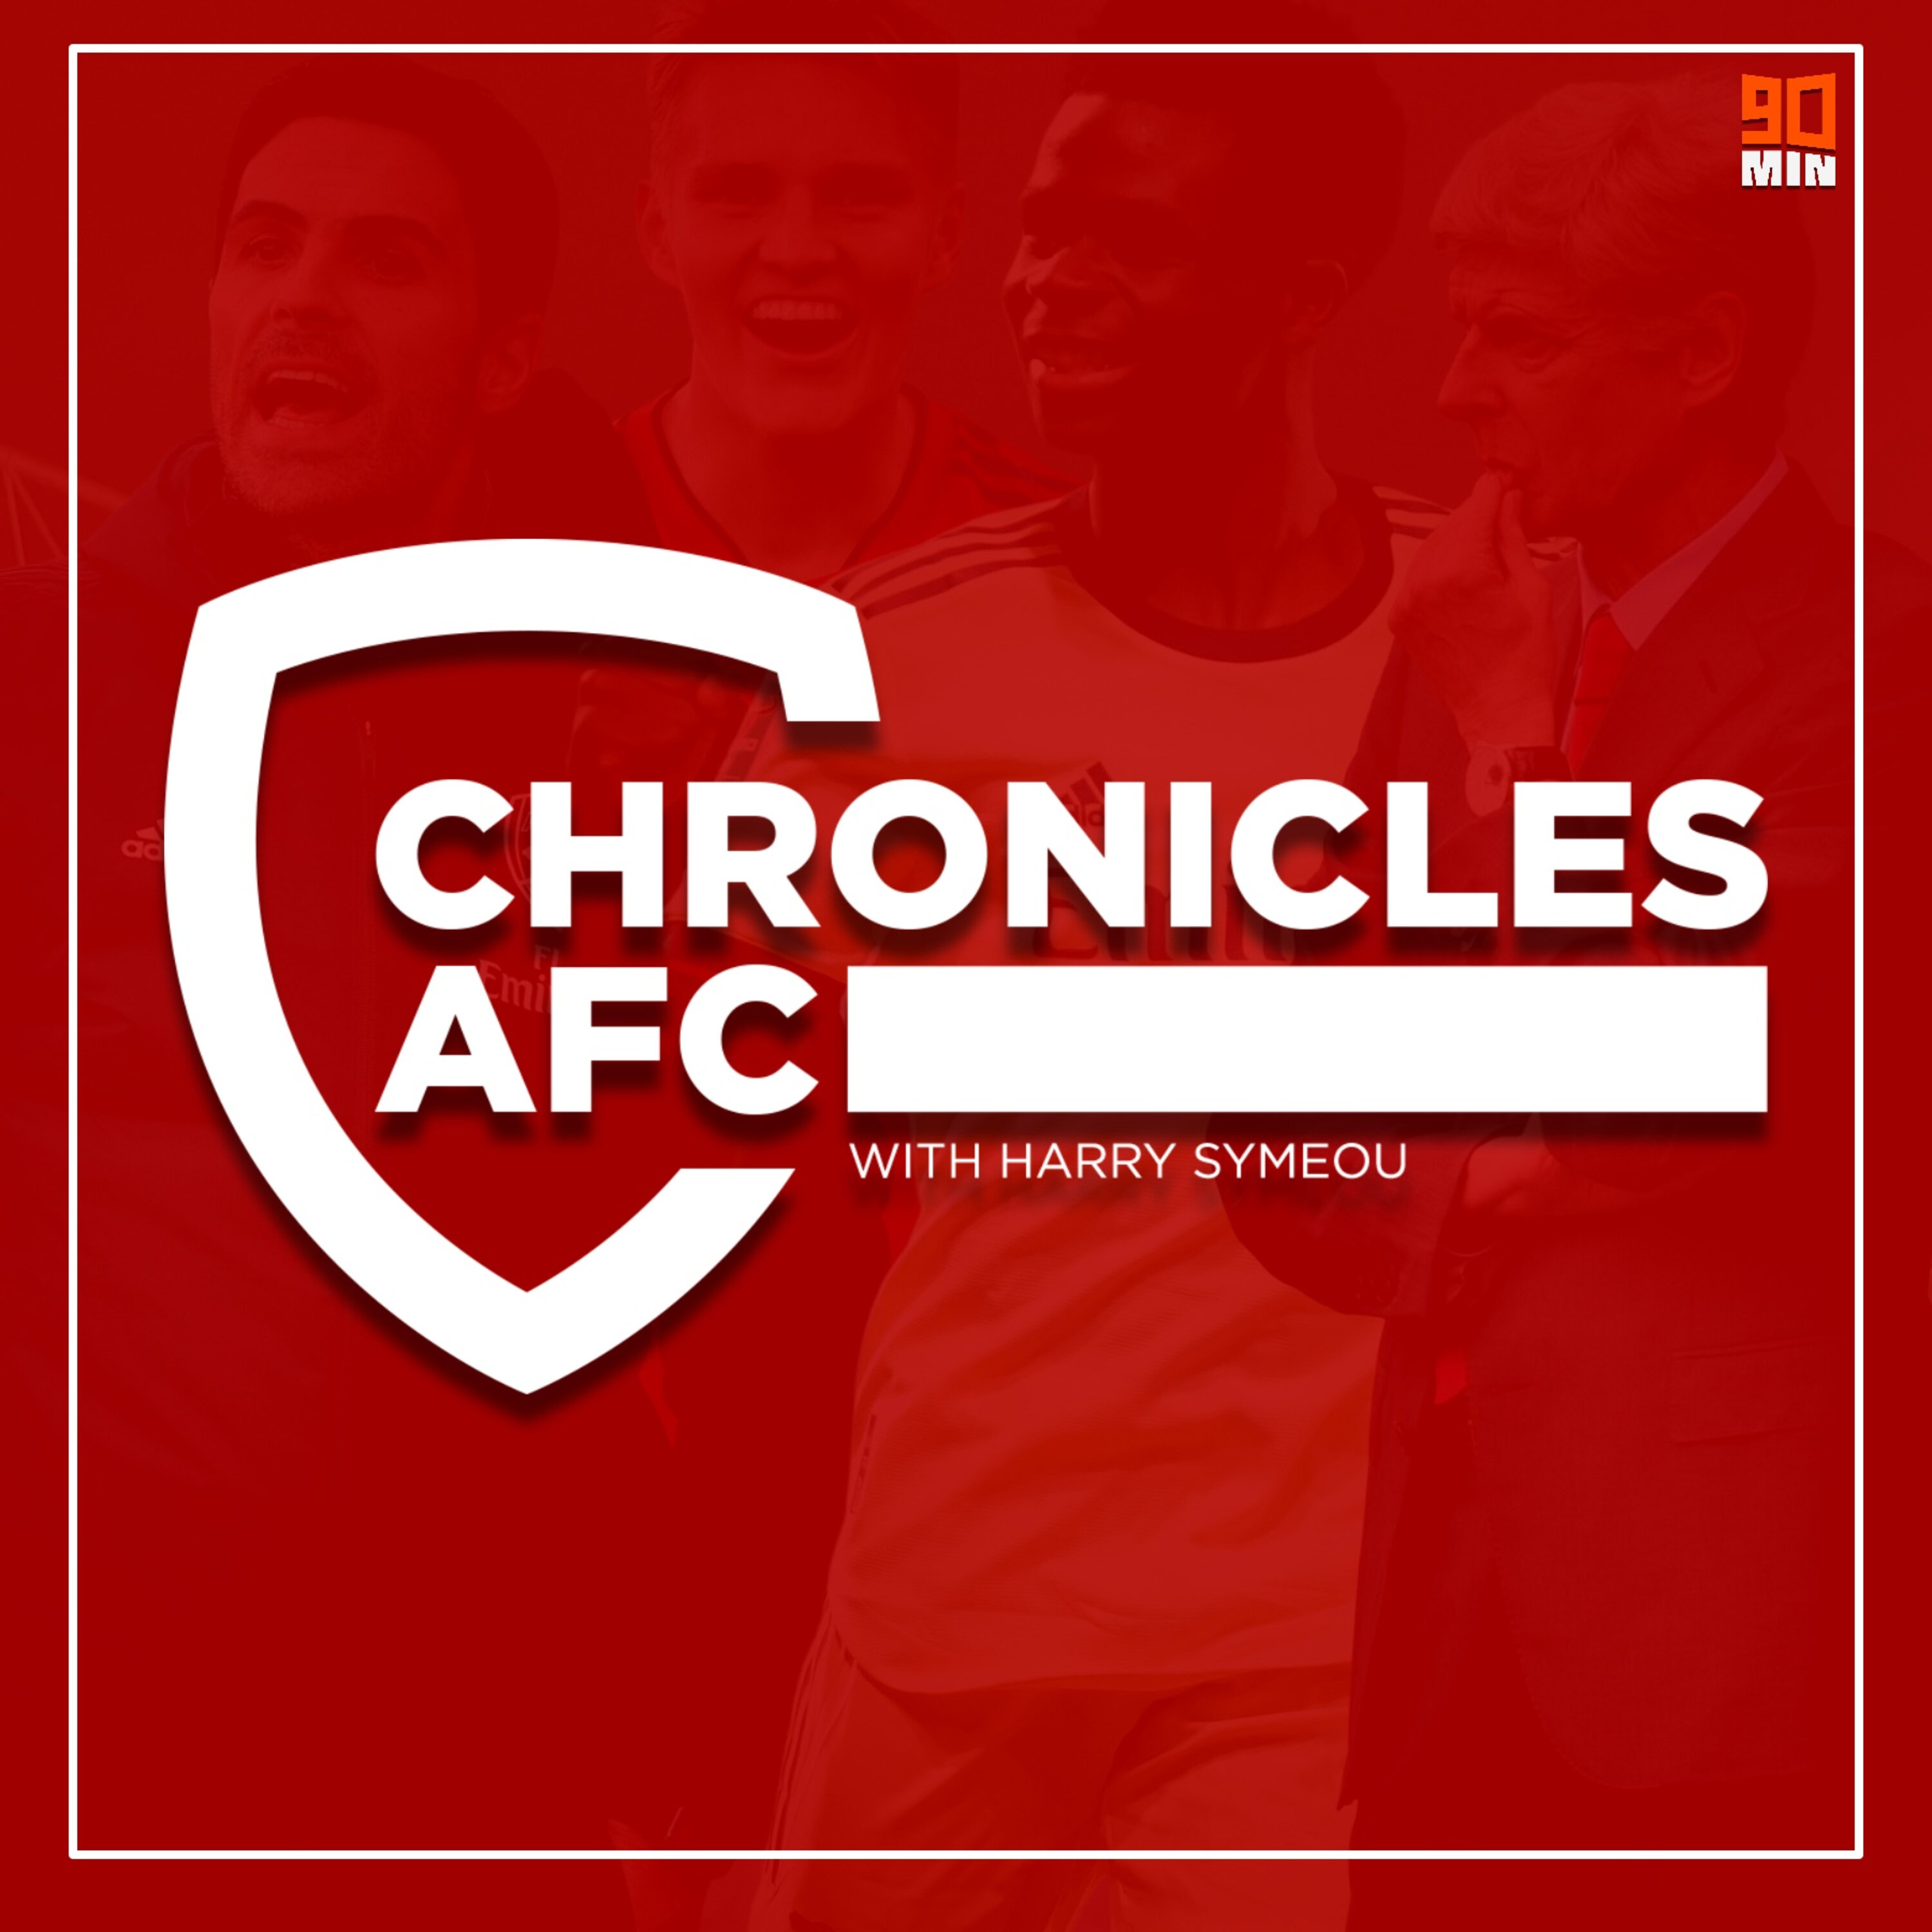 The Chronicles of a Gooner | The Arsenal Podcast